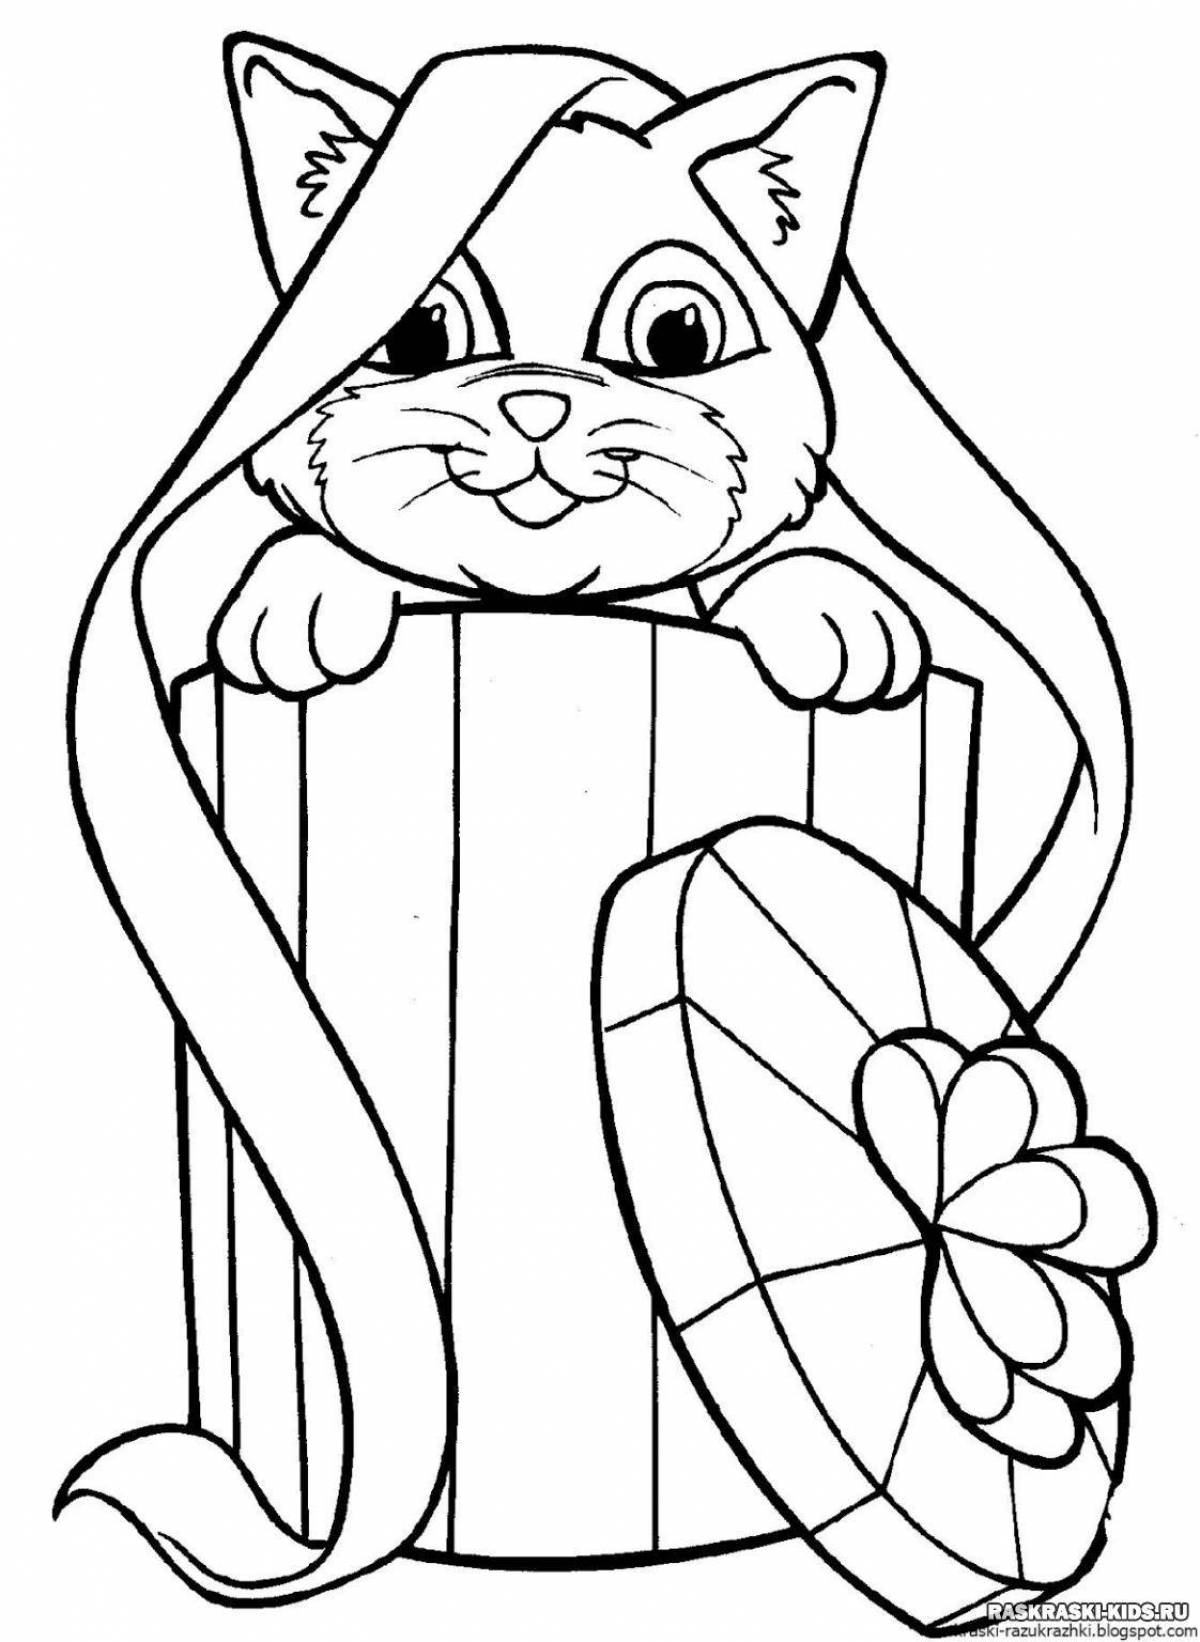 Adorable coloring book for girls cats and kittens